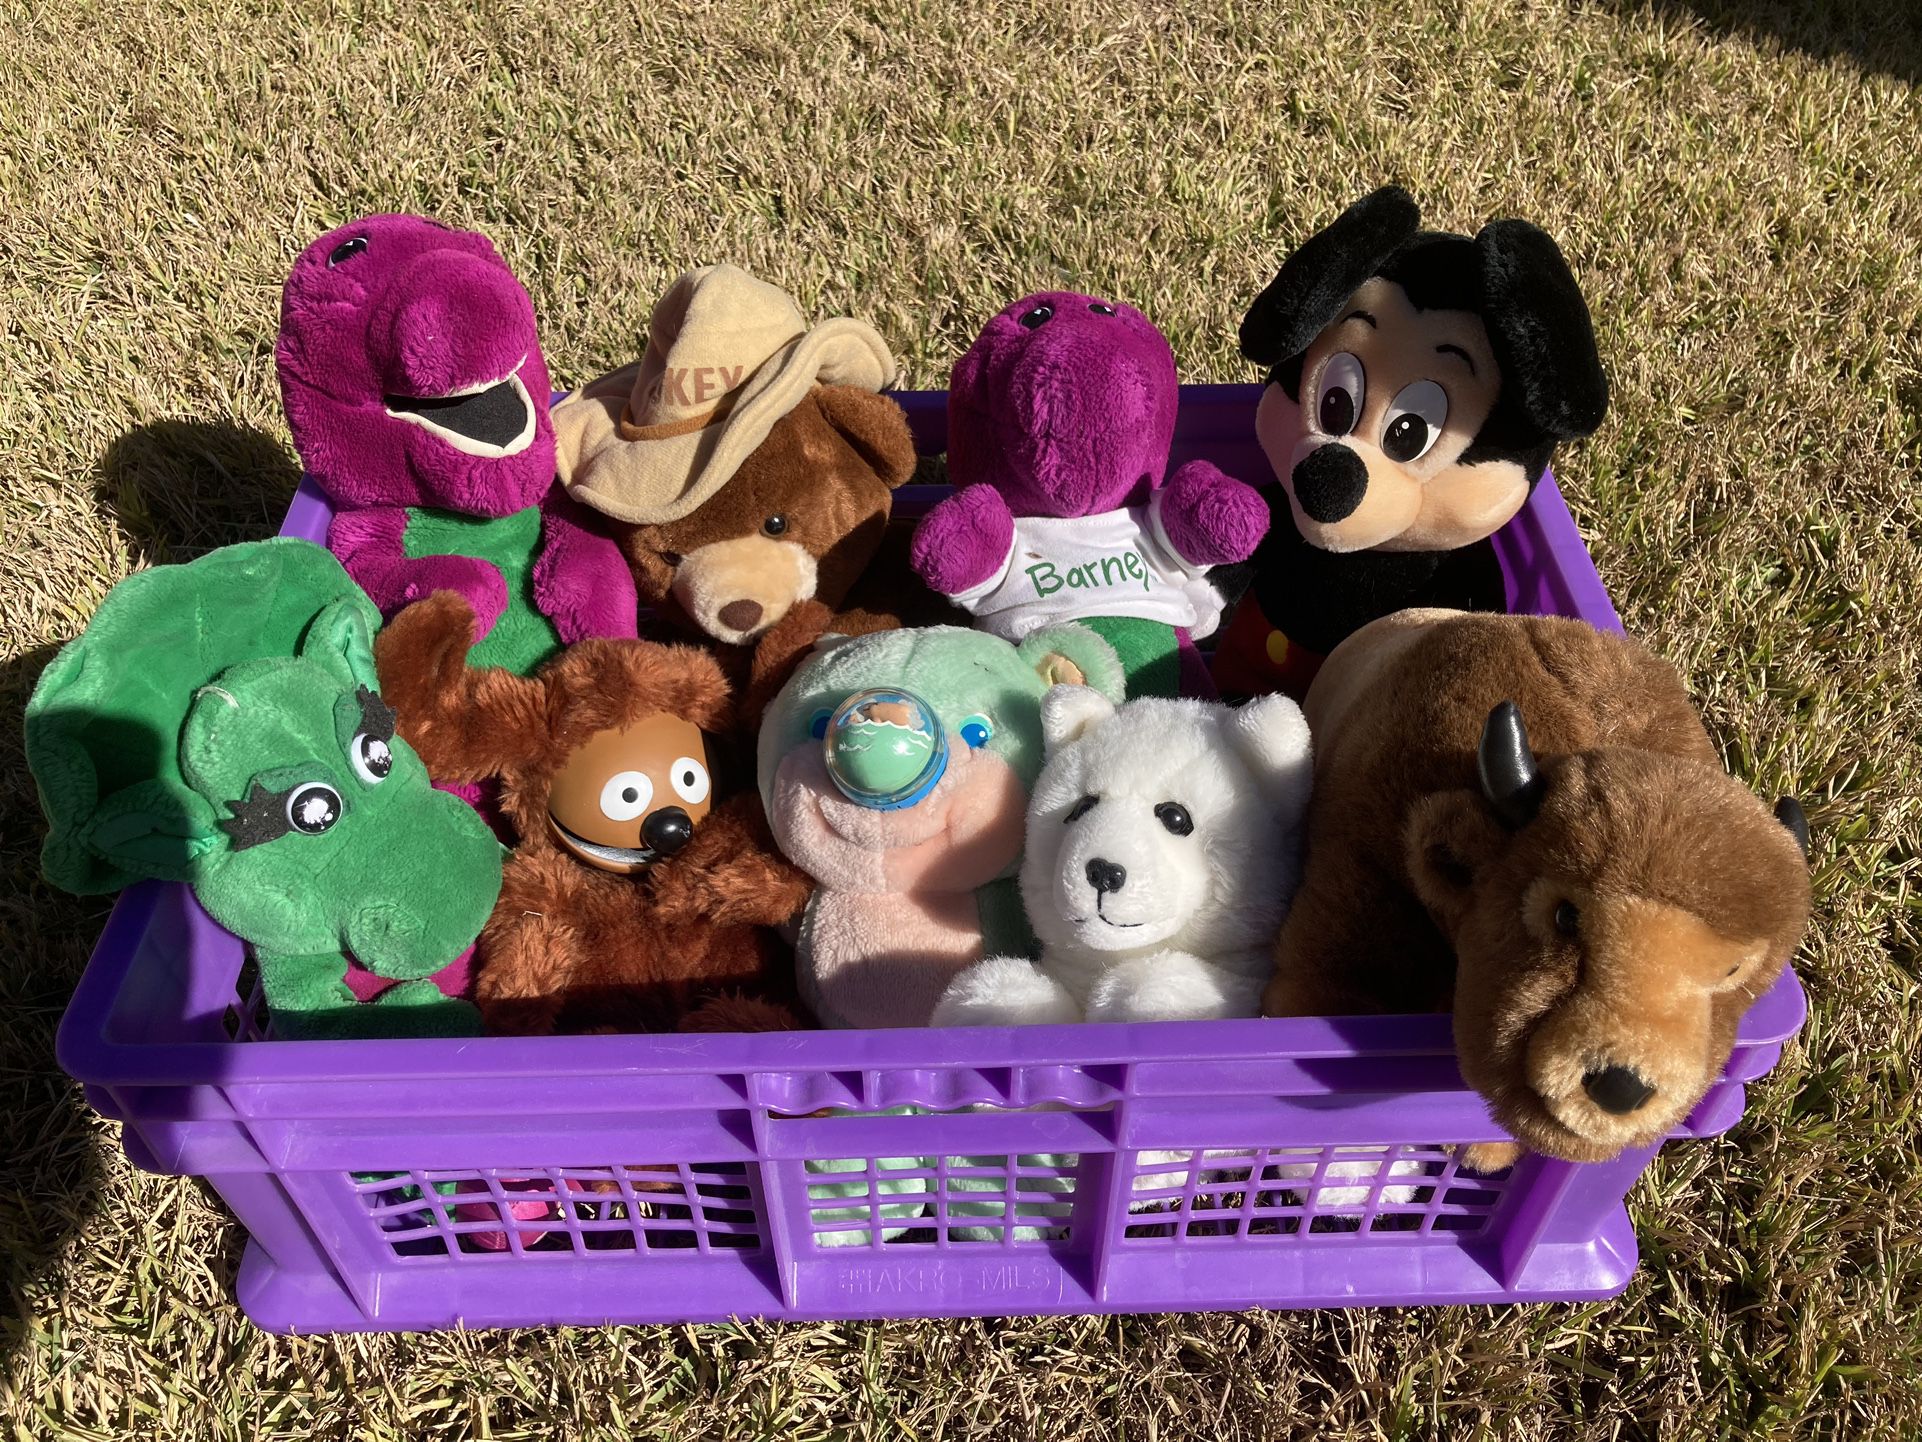 Plush Toy Doll Collection/ 9  Total Including Barney, Baby Bop, Mickey Mouse, Smokey Bear, Sesame Street And More!